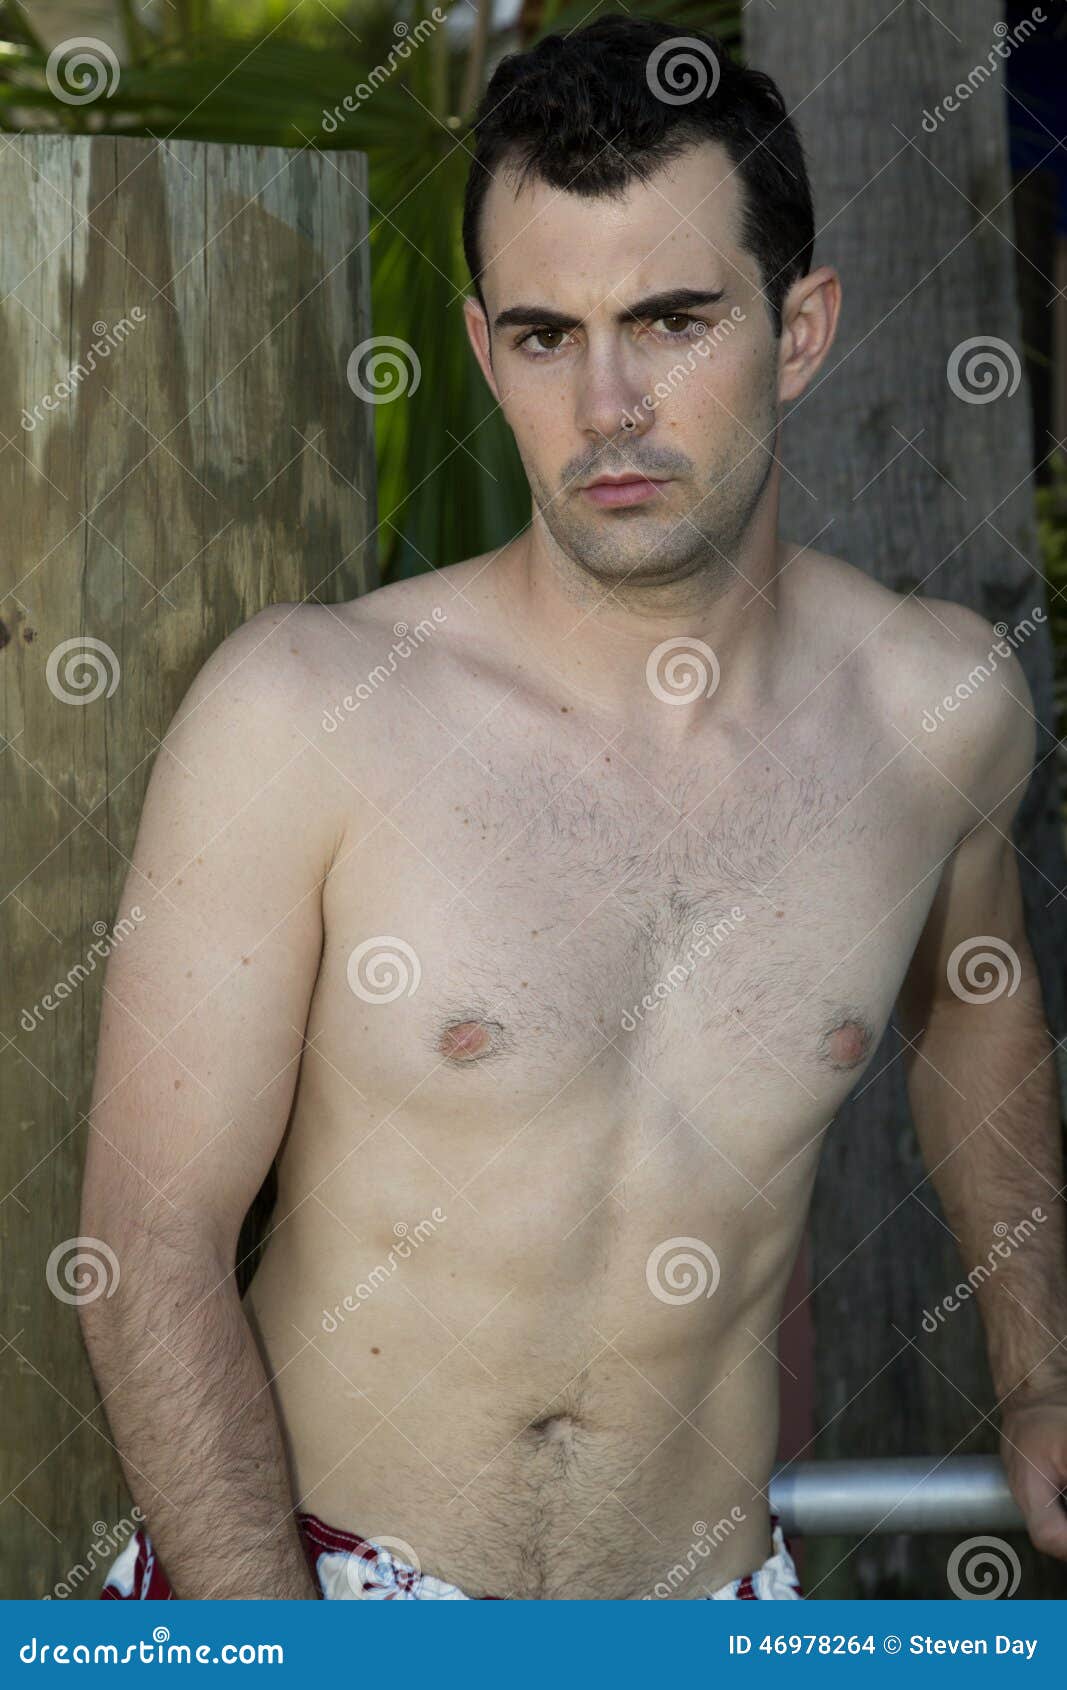 male model glaring at camera with no shirt wearing swimsui